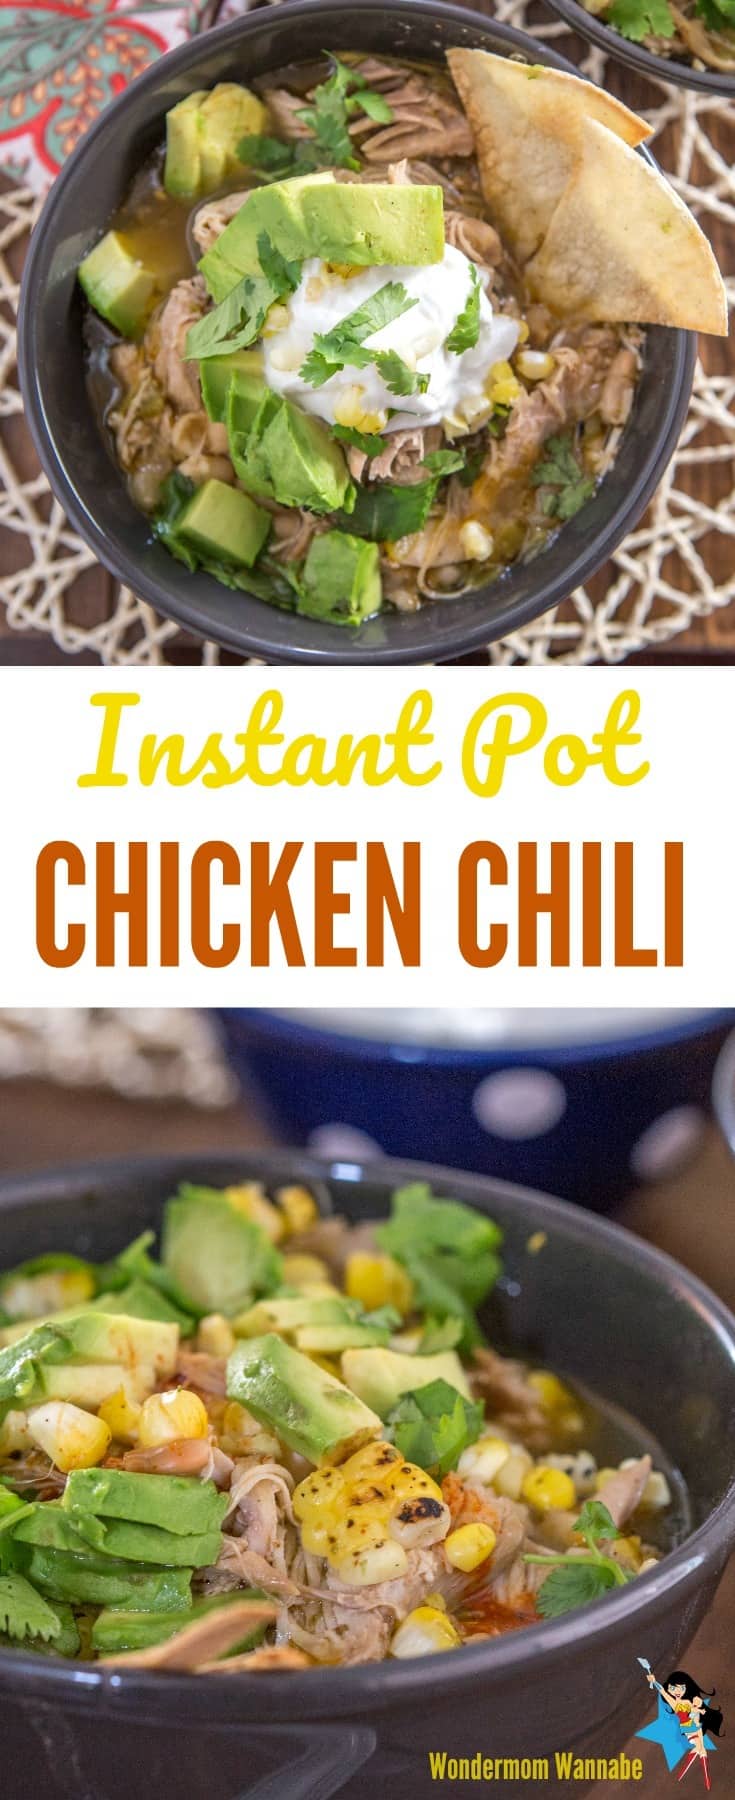 This Instant Pot White Chicken Chili is a healthy, but hearty and satisfying meal. It's guilt-free comfort food with Tex-Mex flair. #instantpot #pressurecooker #chili #chicken via @wondermomwannab